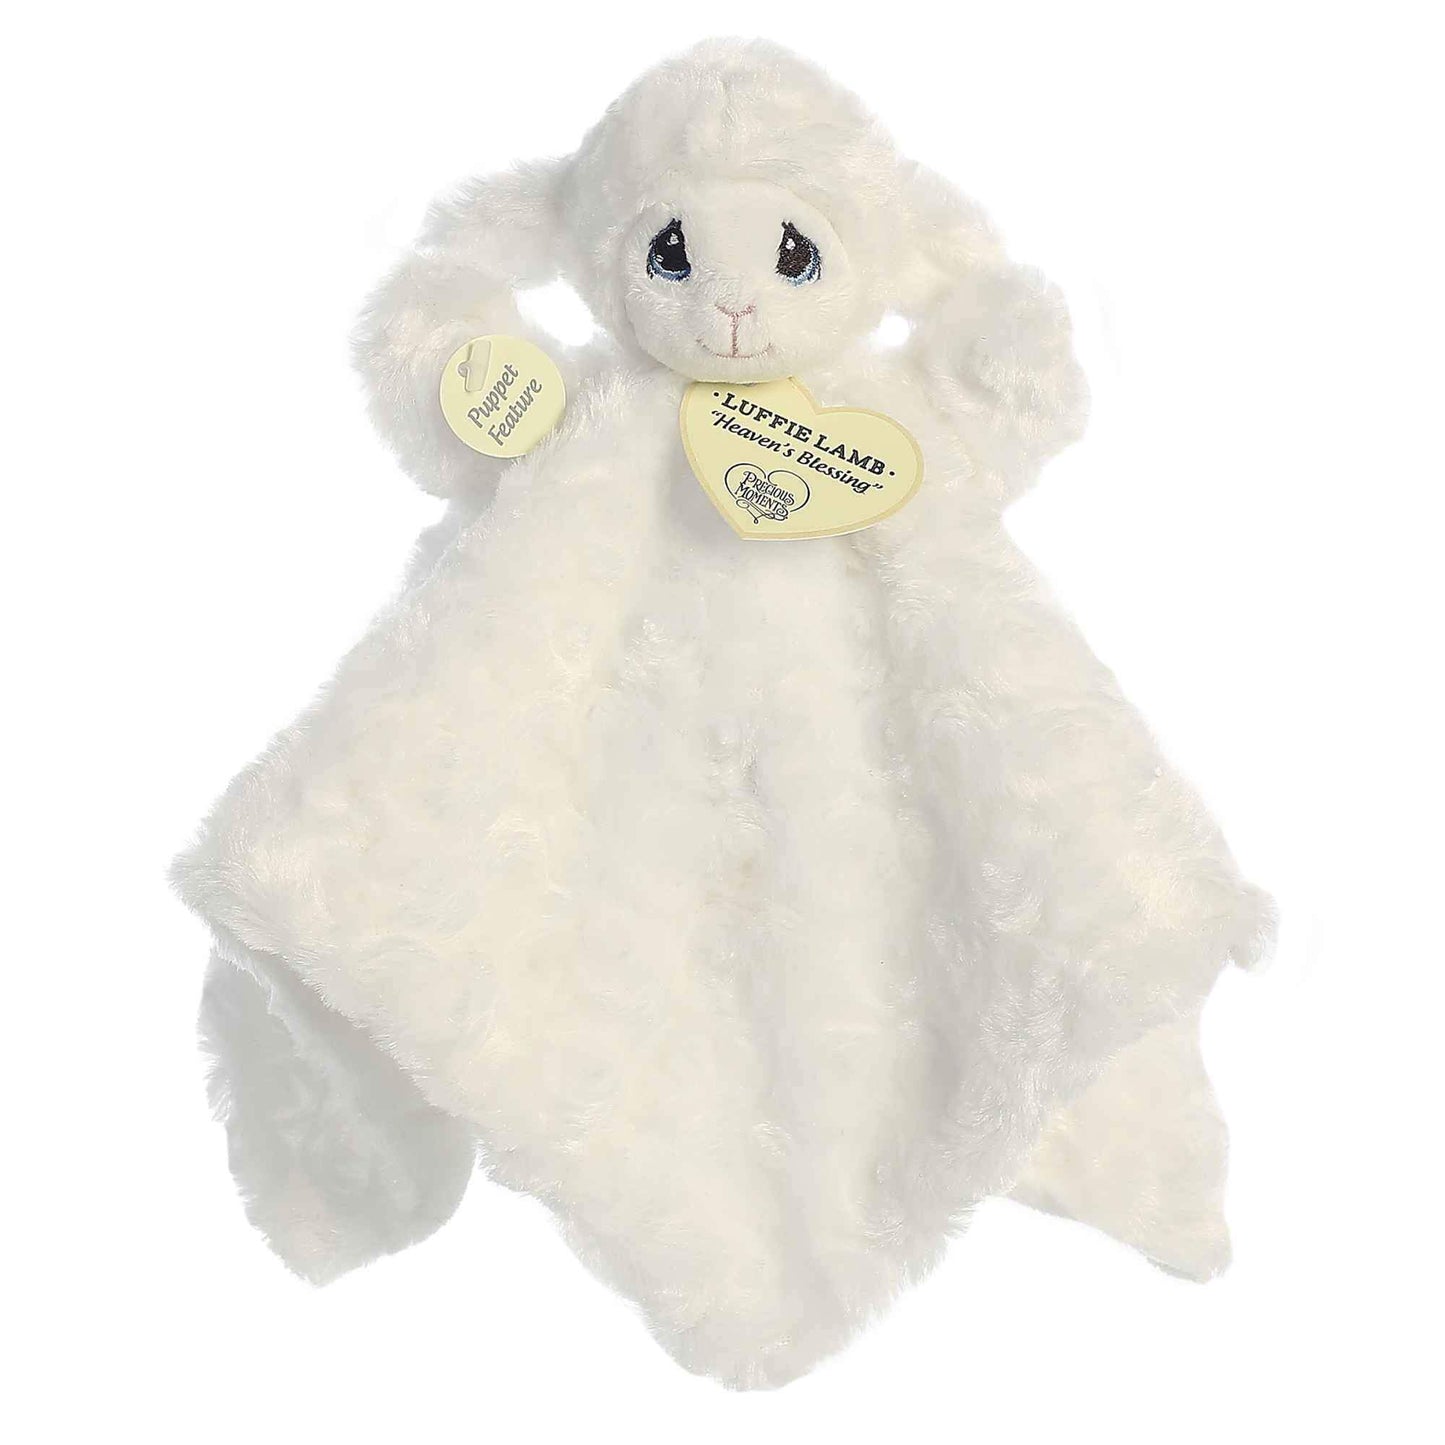 Aurora Luffie Lamb "Heaven's Blessing" - Precious Moments - 18" Luvster Blanket